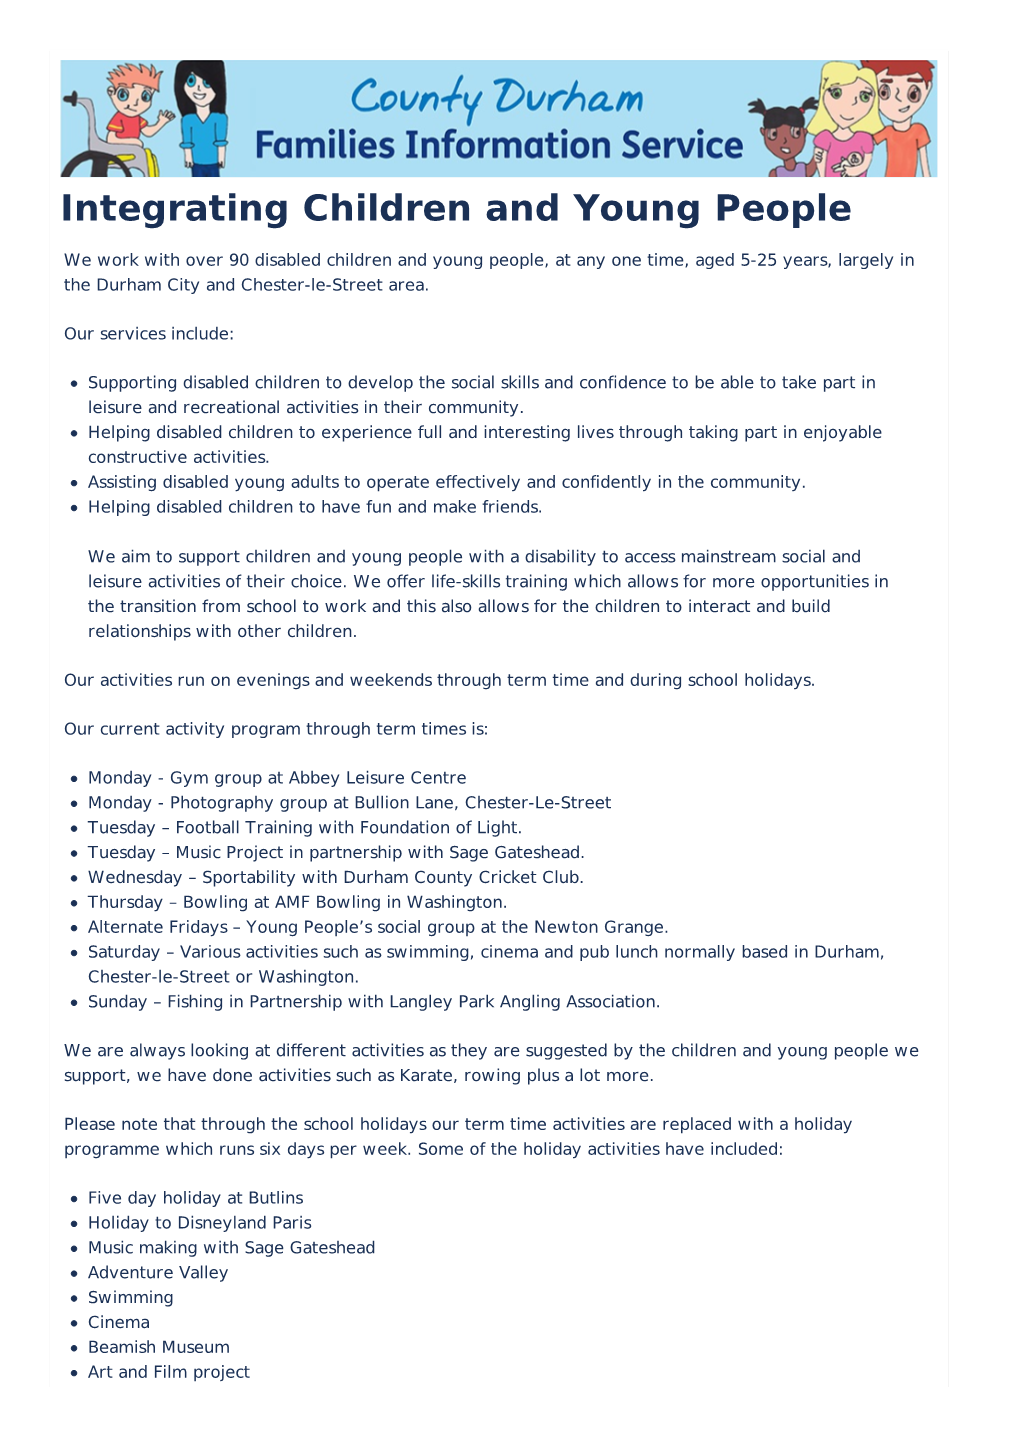 Integrating Children and Young People